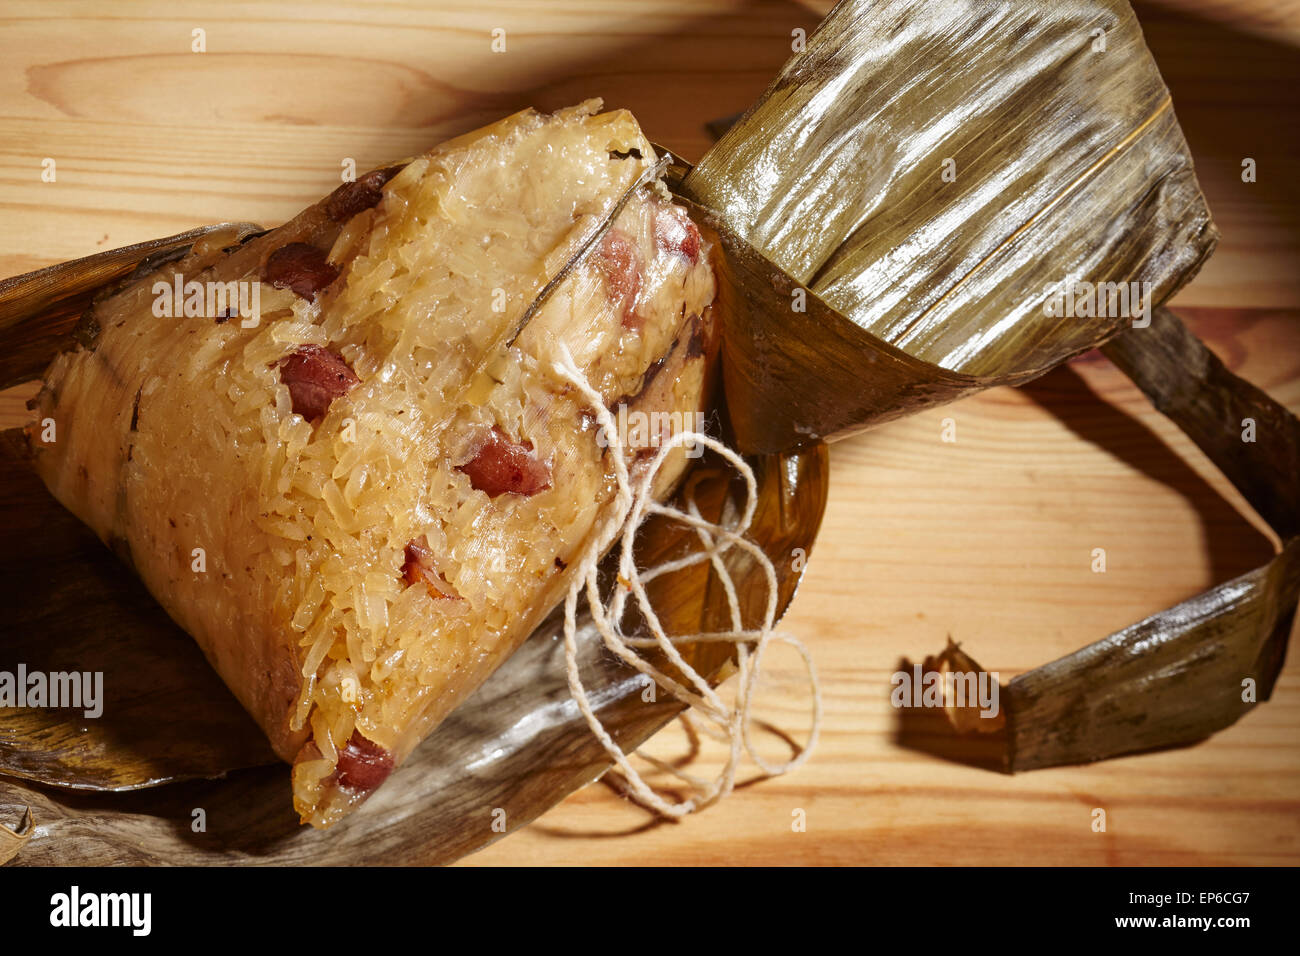 Lotus Leaf stuffed with sticky rice, a typical southern Chinese street food snack. Called 'Lo Mai Gai' in Cantonese. Stock Photo